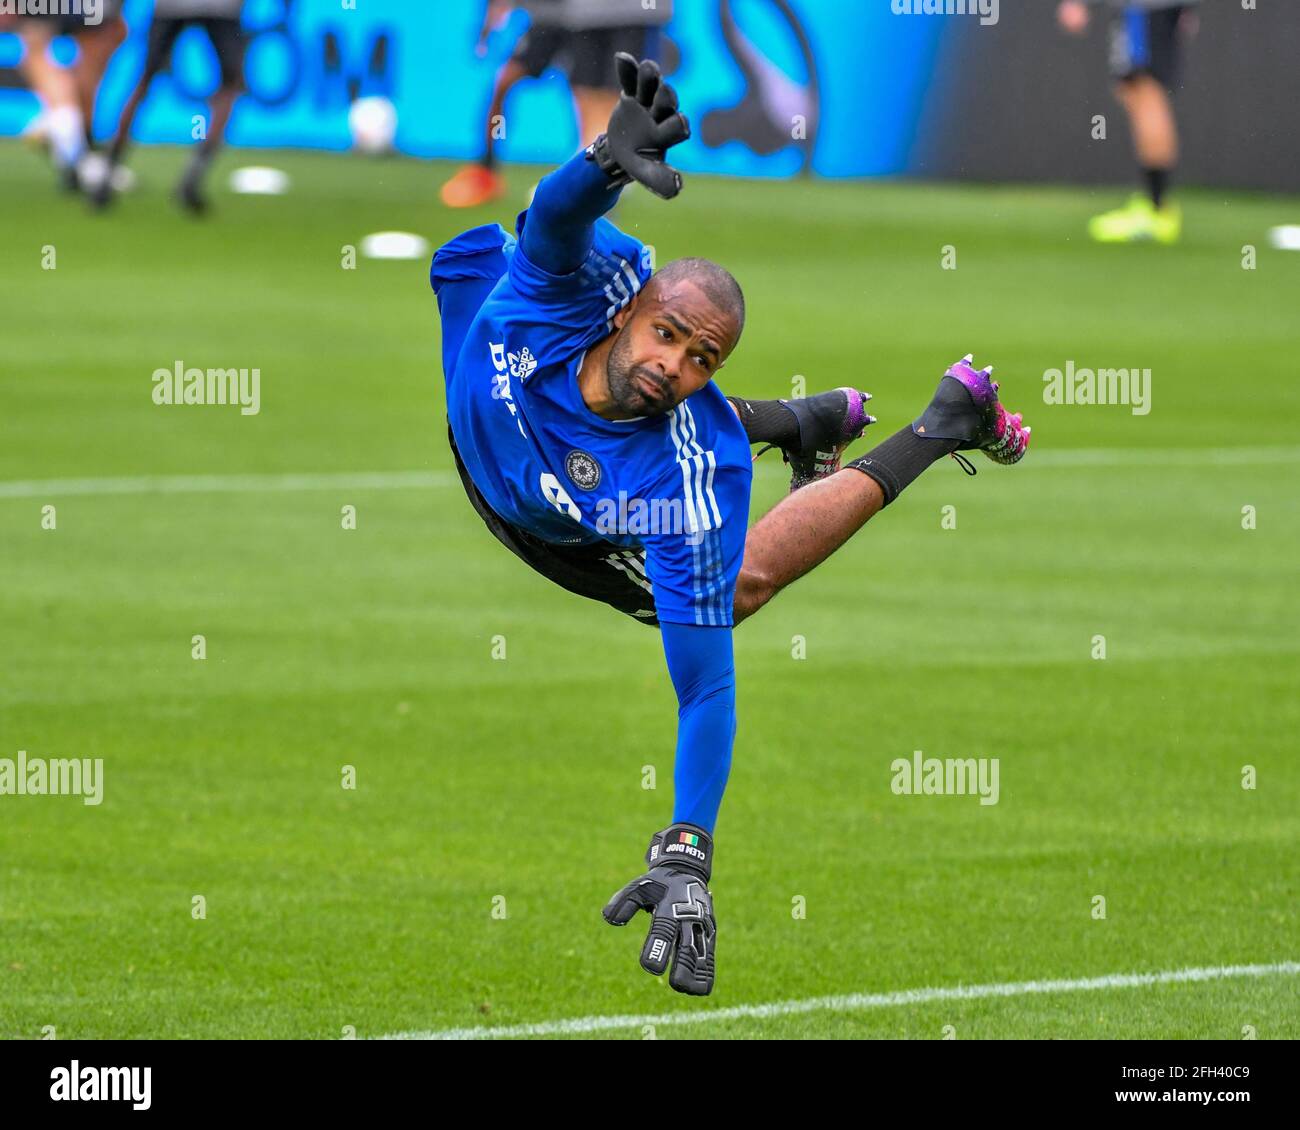 Nashville, TN, USA. 24th Apr, 2021. Montreal goalkeeper, Clement Diop (23), makes a diving save during warm up before the MLS match between CF Montreal and Nashville SC at Nissan Stadium in Nashville, TN. Kevin Langley/CSM/Alamy Live News Stock Photo